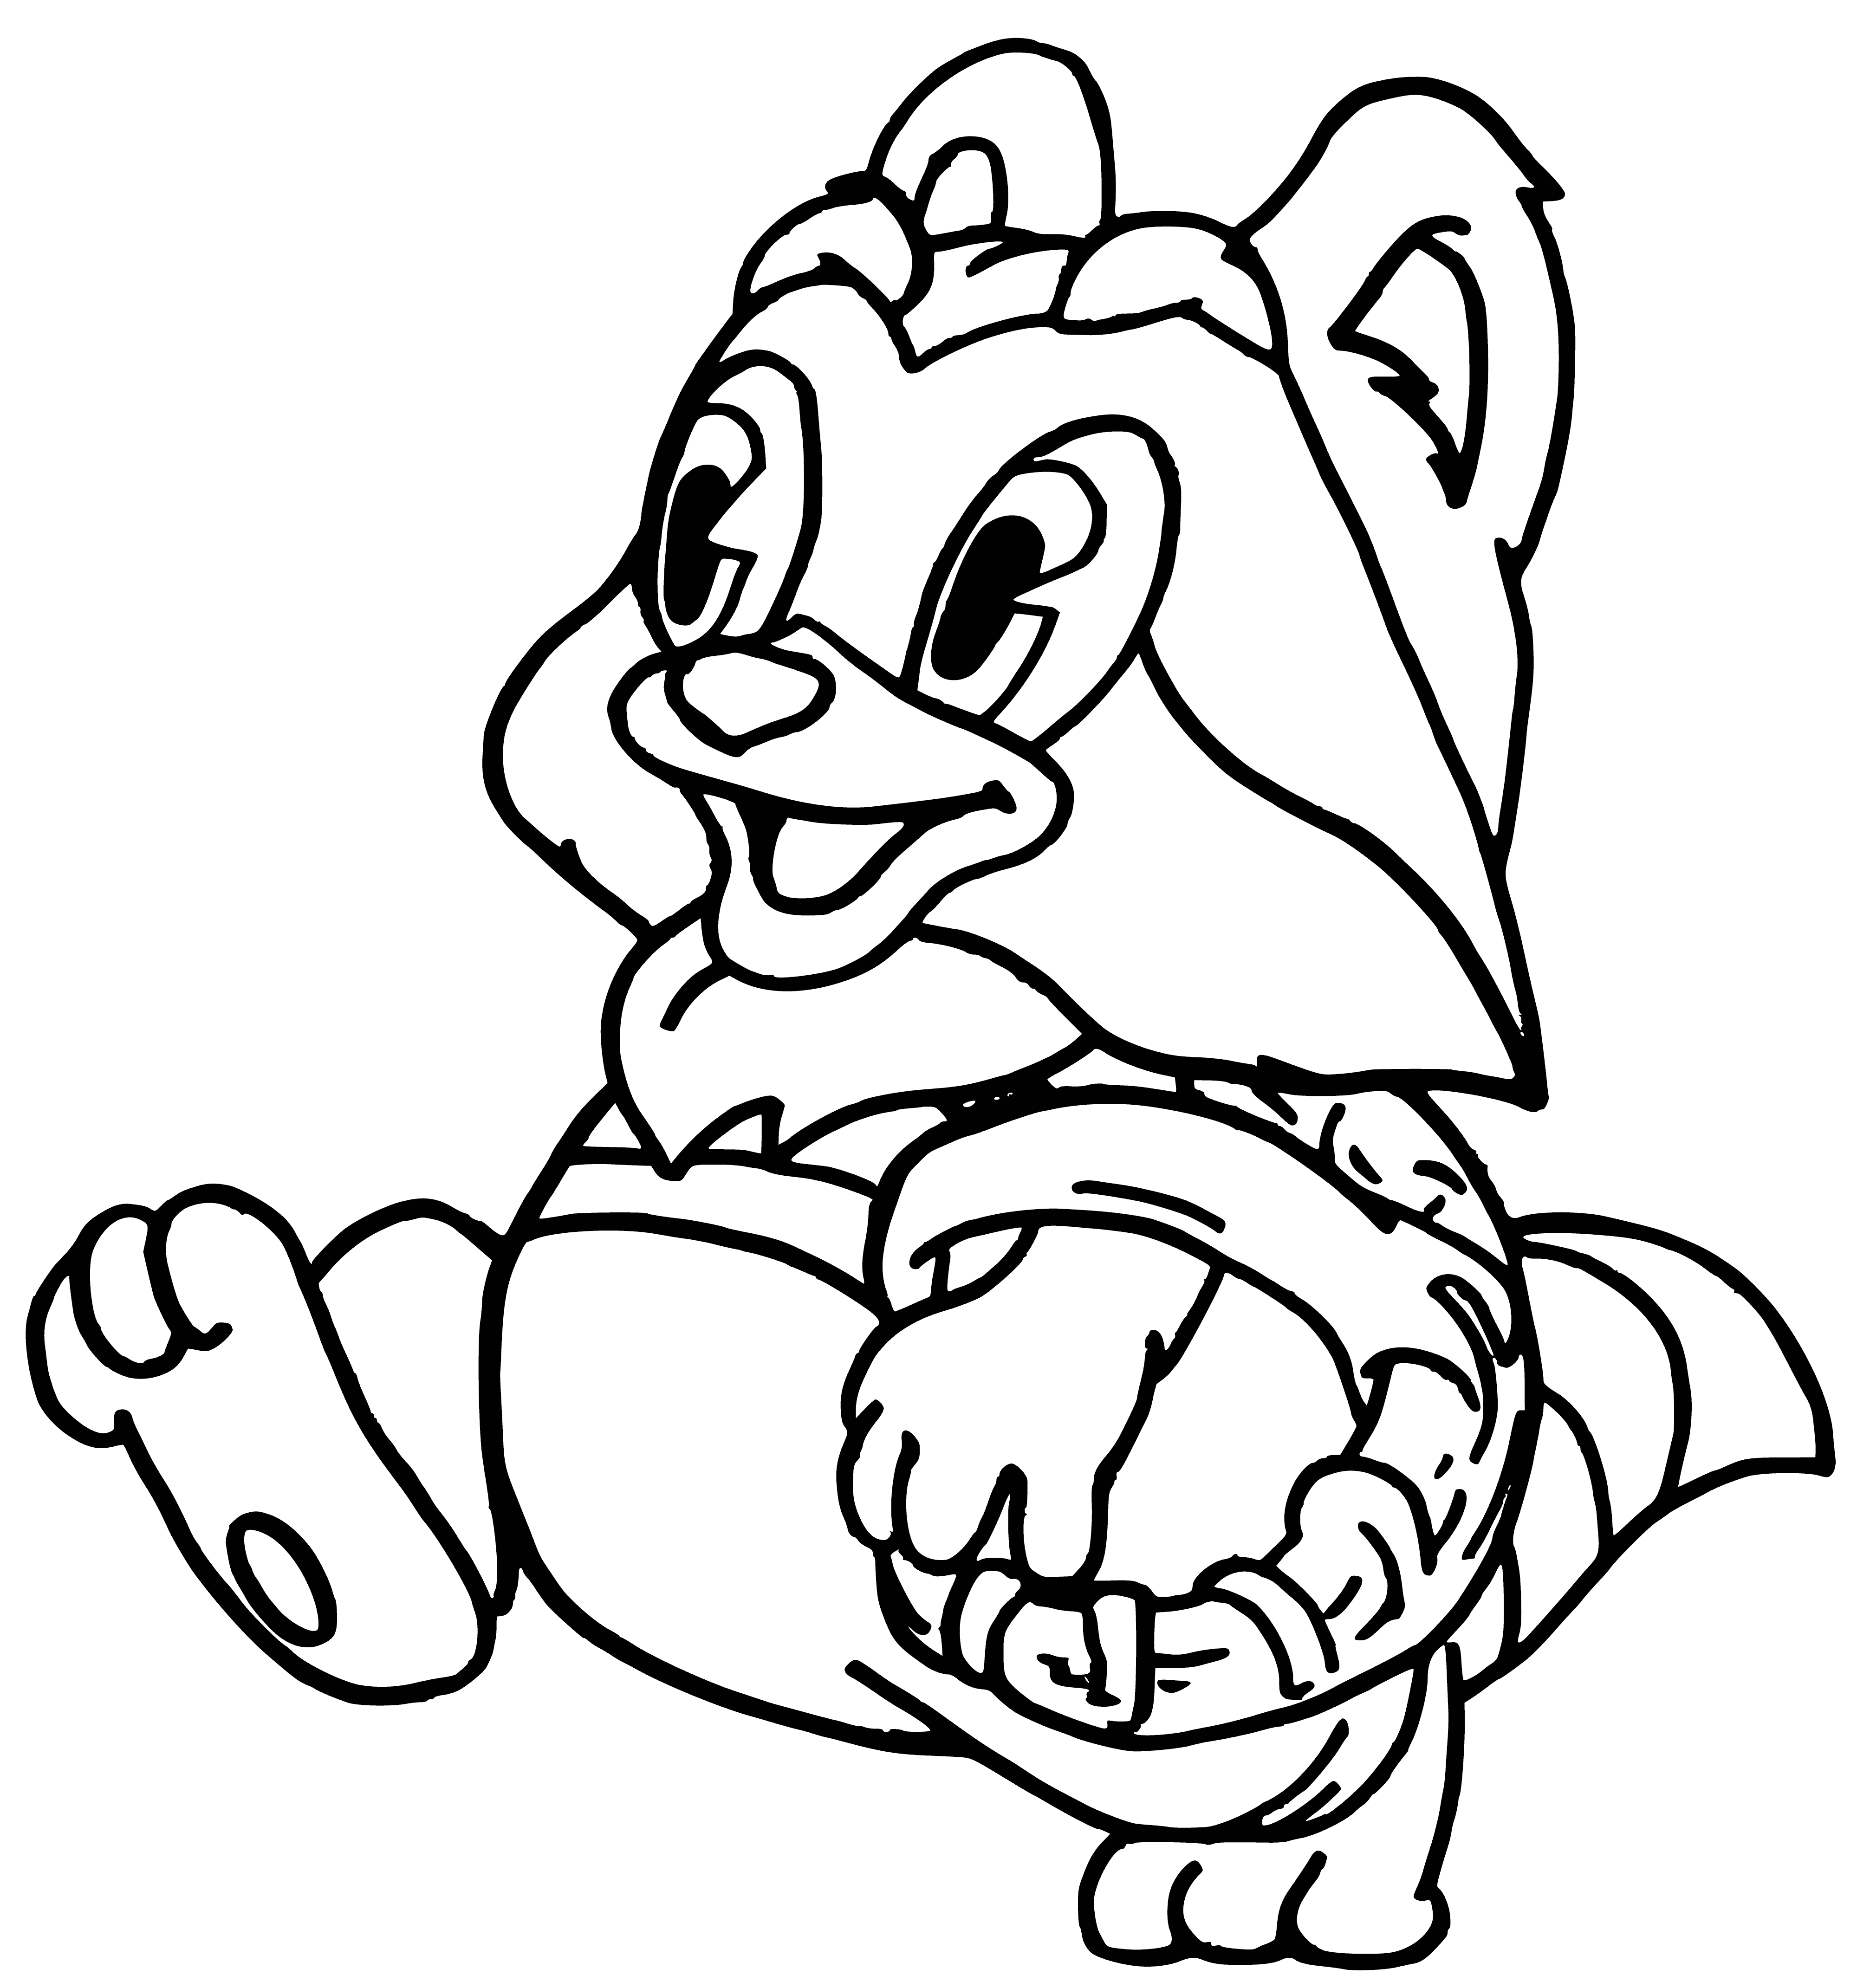 coloring page: Small, brown and white raccoon stands in center of coloring page, tail curled around body. Leaves and branches in background.